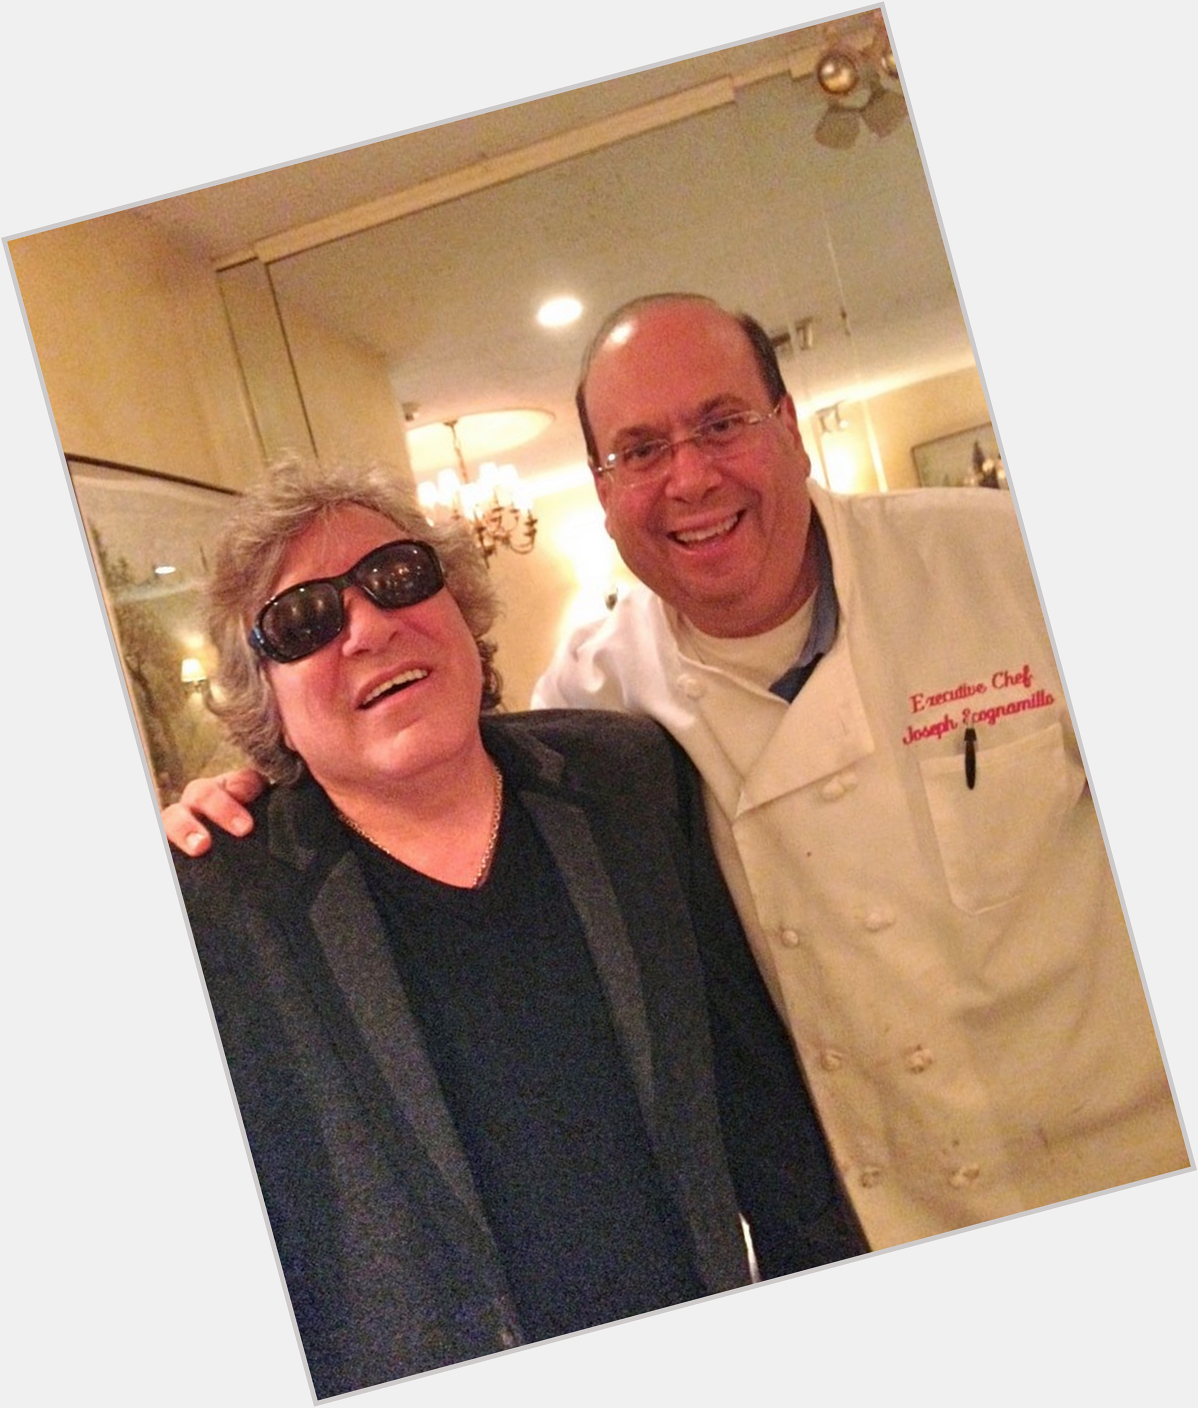 Happy 70th Birthday to our friend Jose Feliciano!!! We wish you feliz cumpleanos and many more!!! 